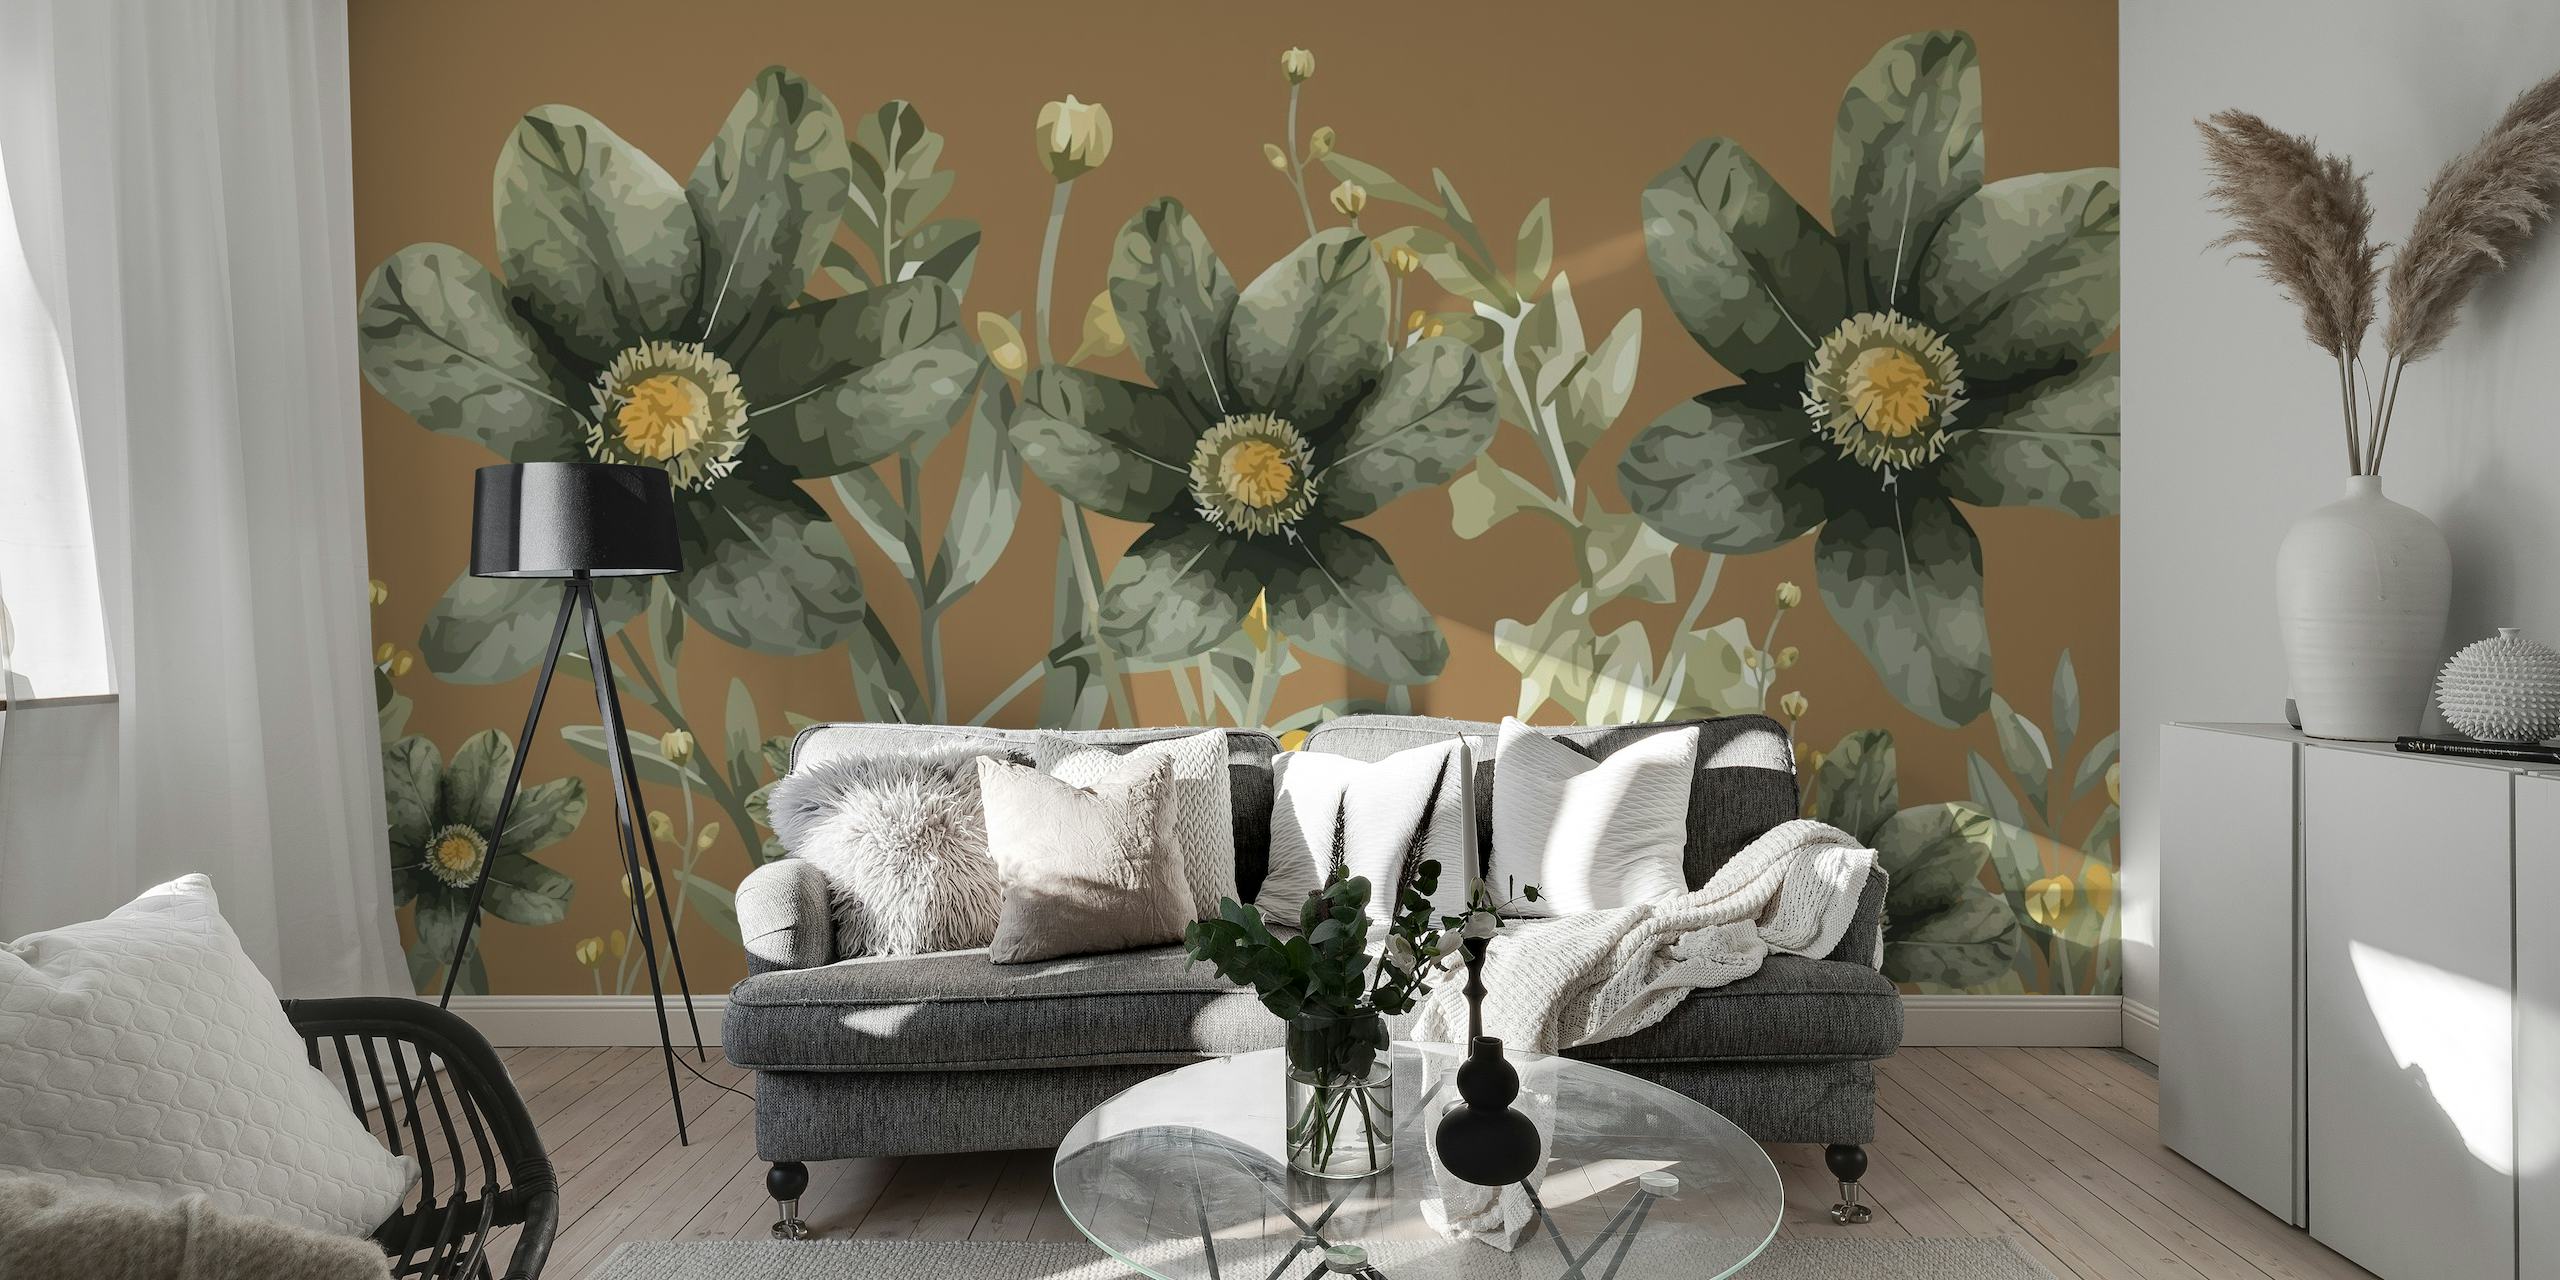 Artistic depiction of flowers in spring with a mocha background